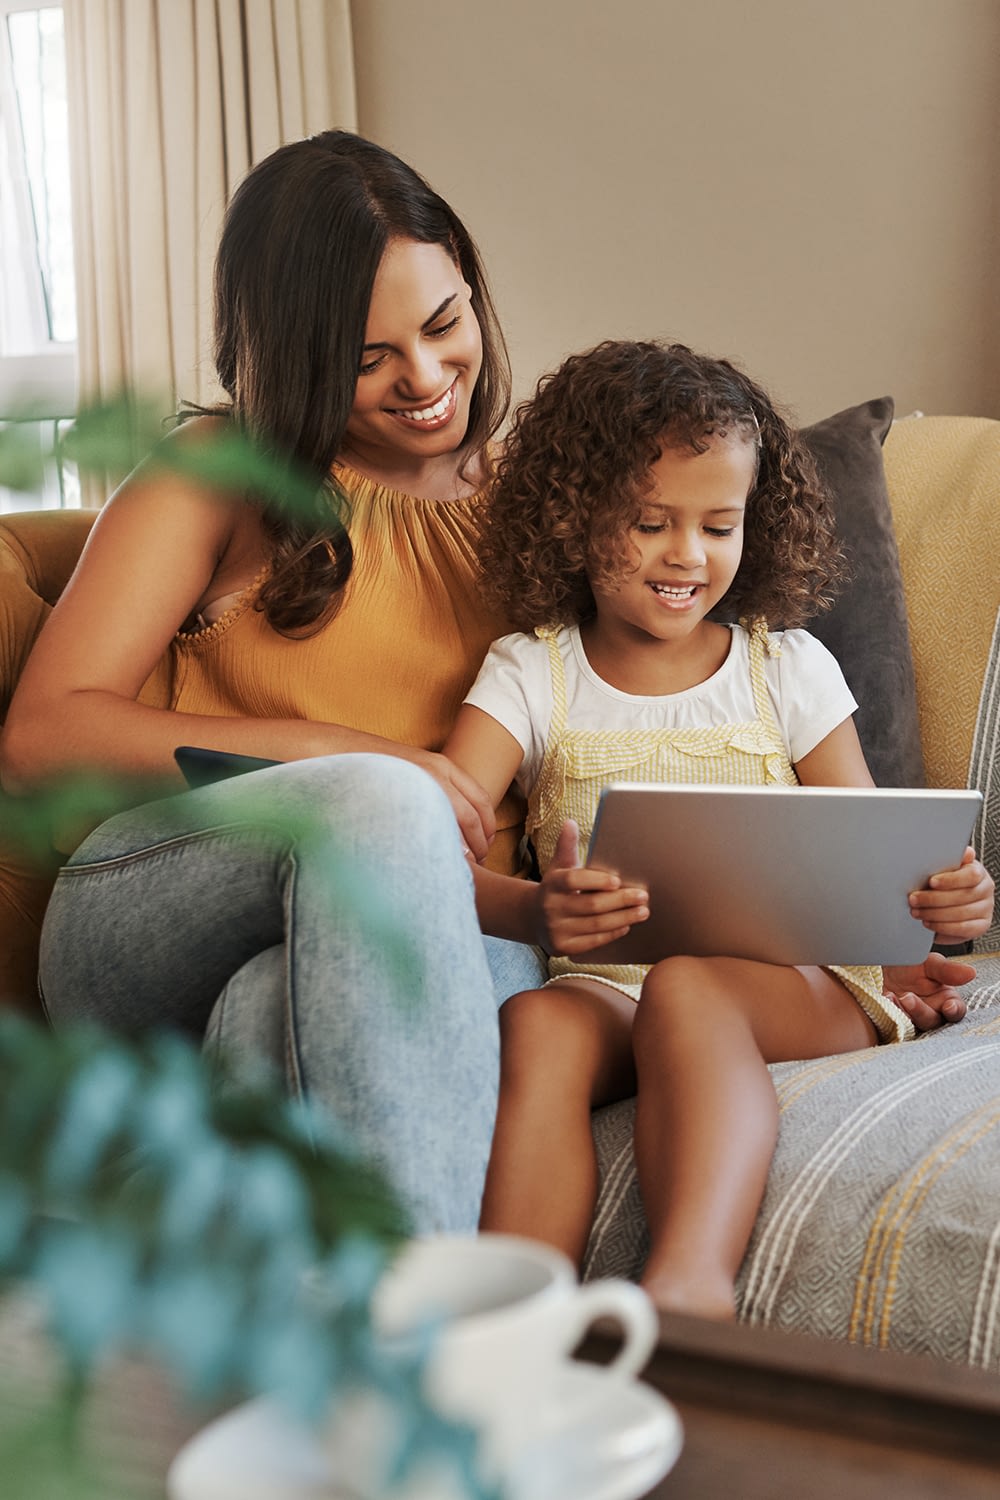 Shot of an attractive young woman and her daughter sitting on the sofa at home and using technology - stock photo